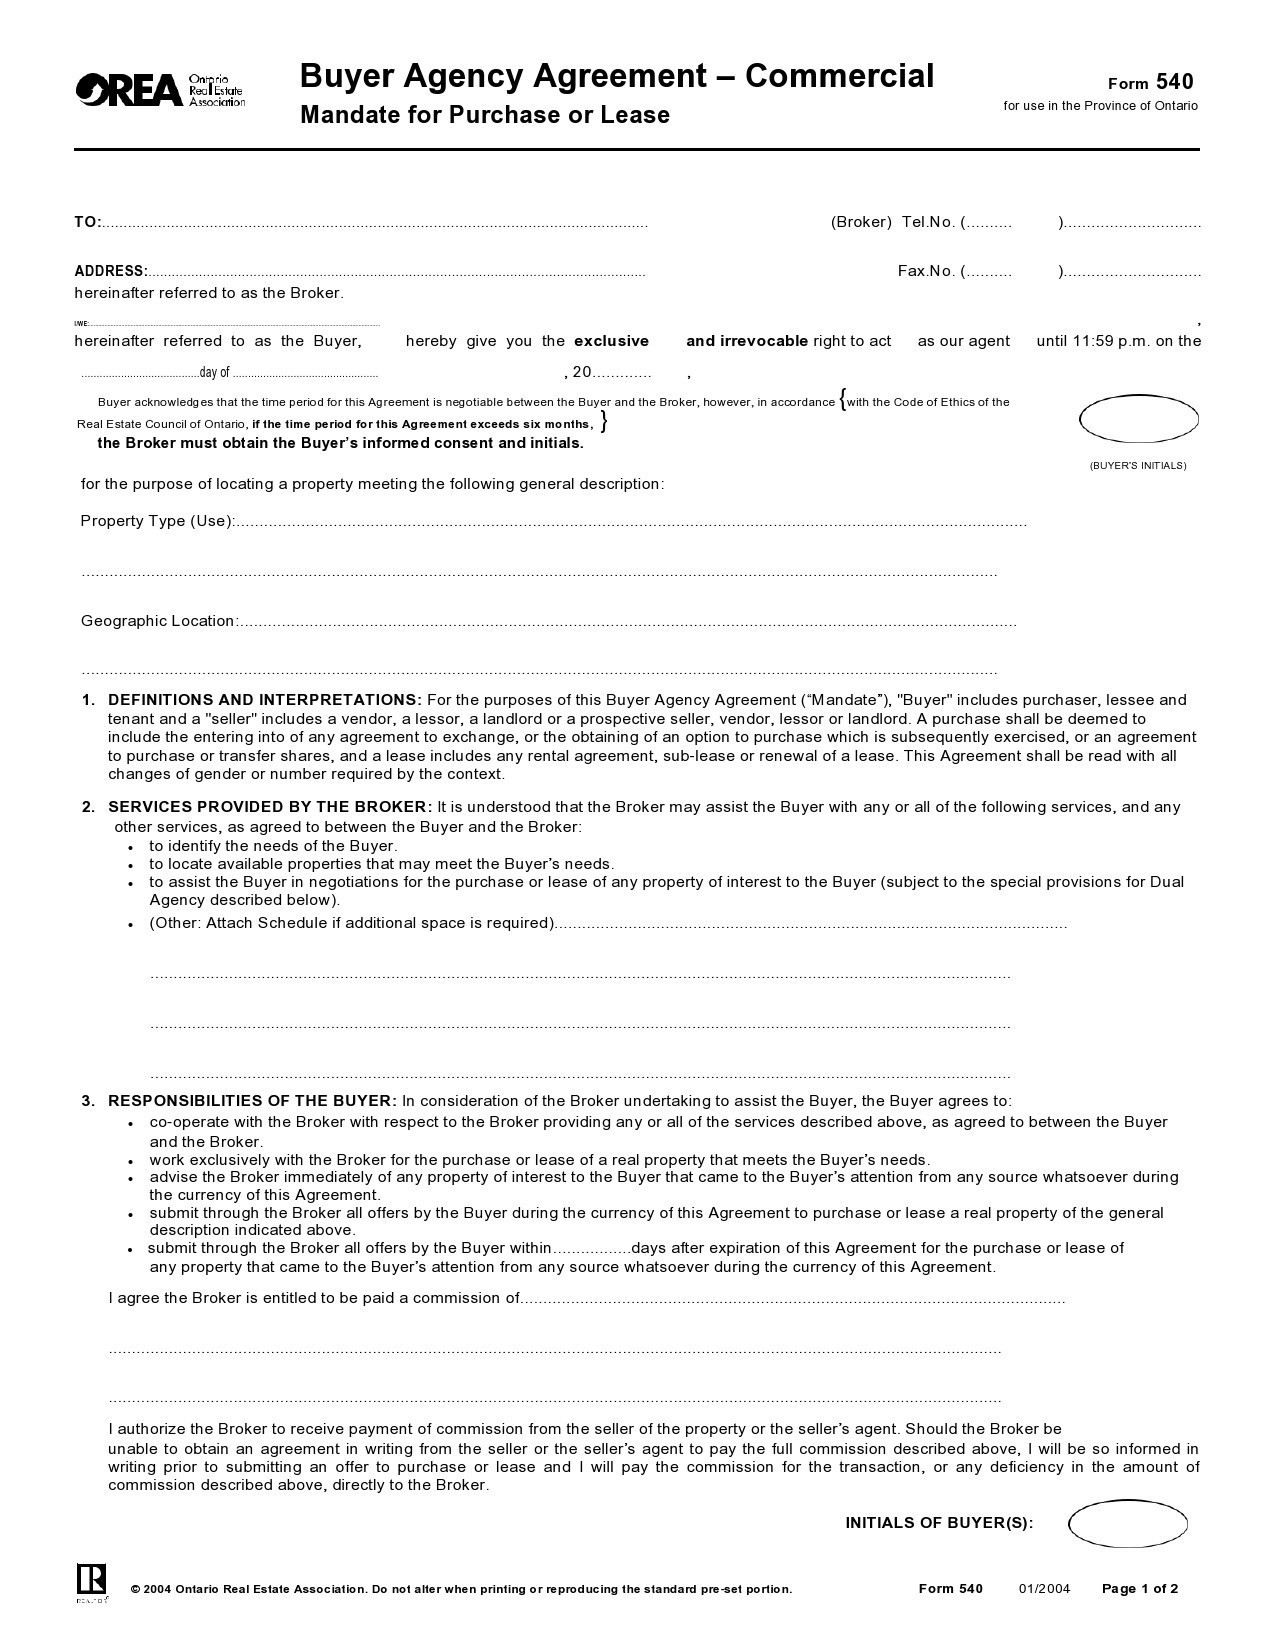 Free buyer agency agreement 24